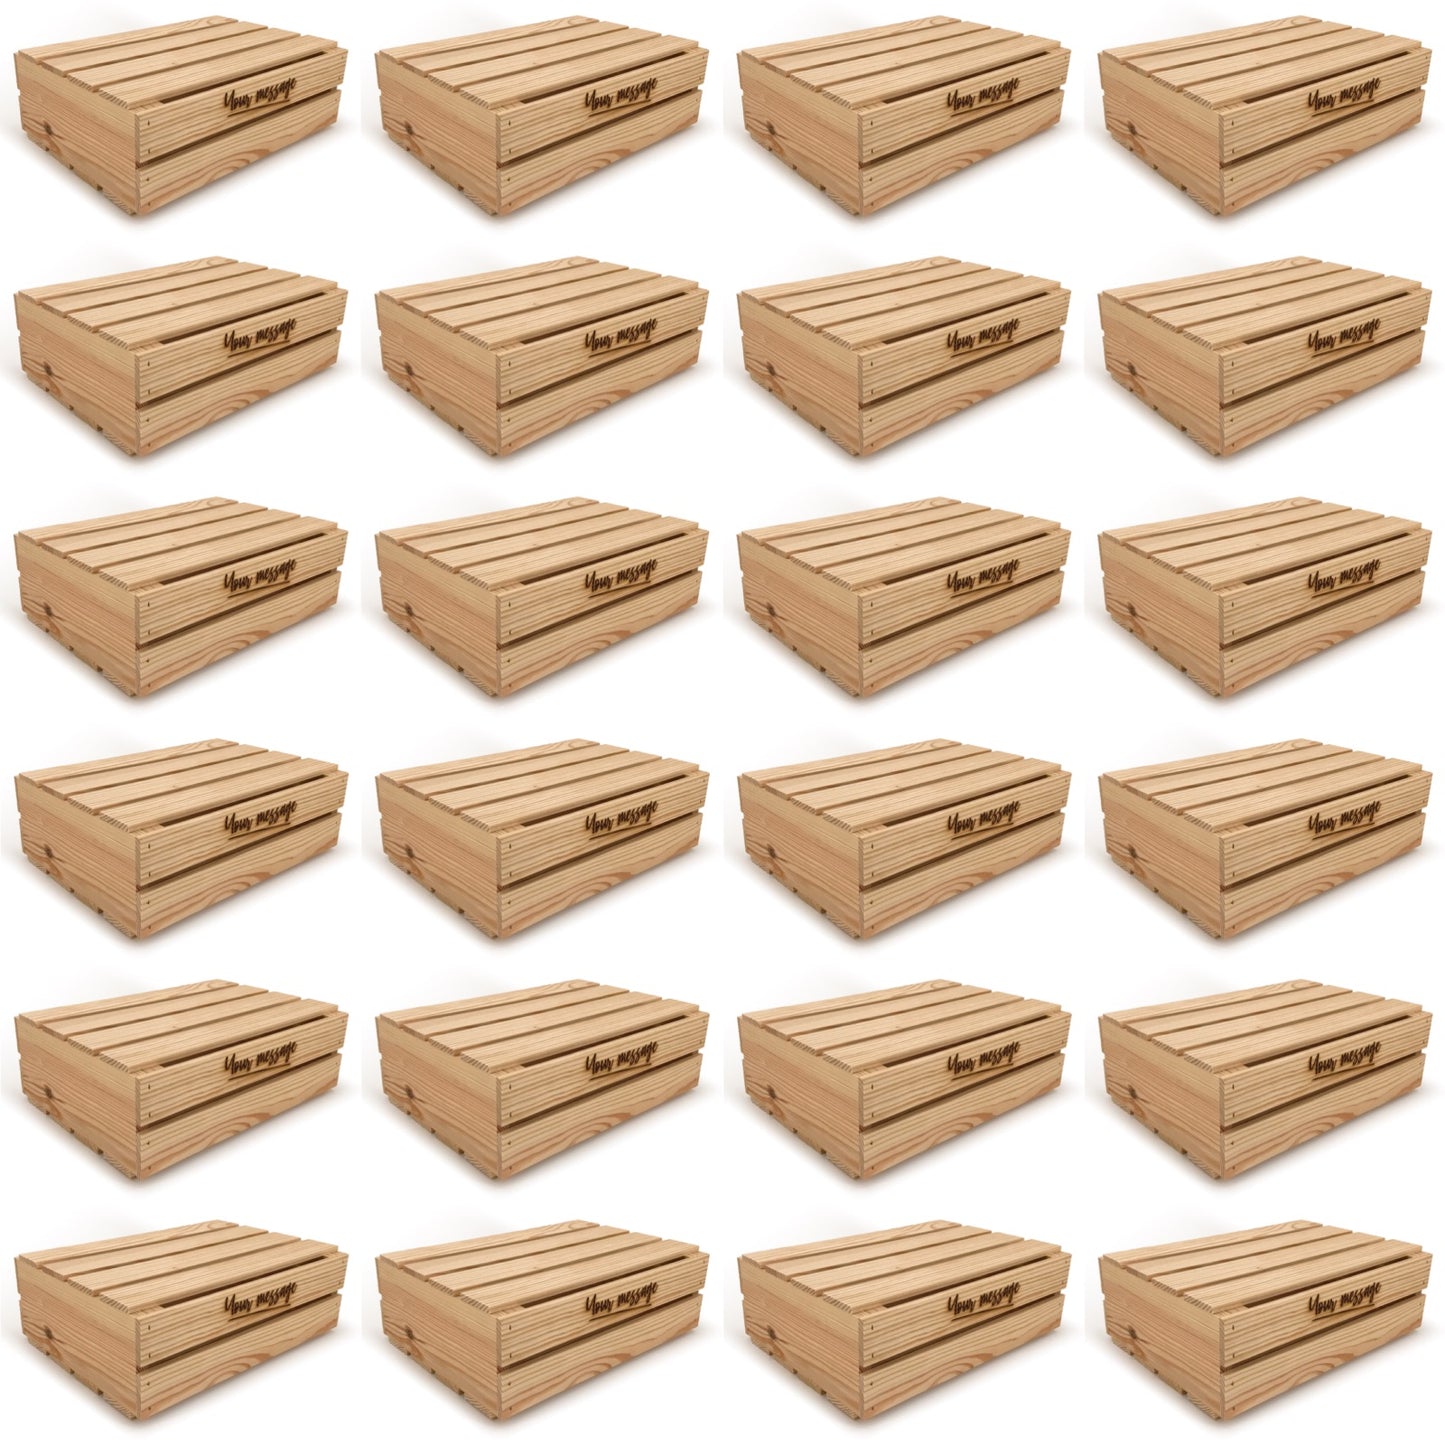 24 Small wooden crates with lid and custom message 16x12x5.25, 6-WS-16-12-5.25-ST-NW-LL, 12-WS-16-12-5.25-ST-NW-LL, 24-WS-16-12-5.25-ST-NW-LL, 48-WS-16-12-5.25-ST-NW-LL, 96-WS-16-12-5.25-ST-NW-LL